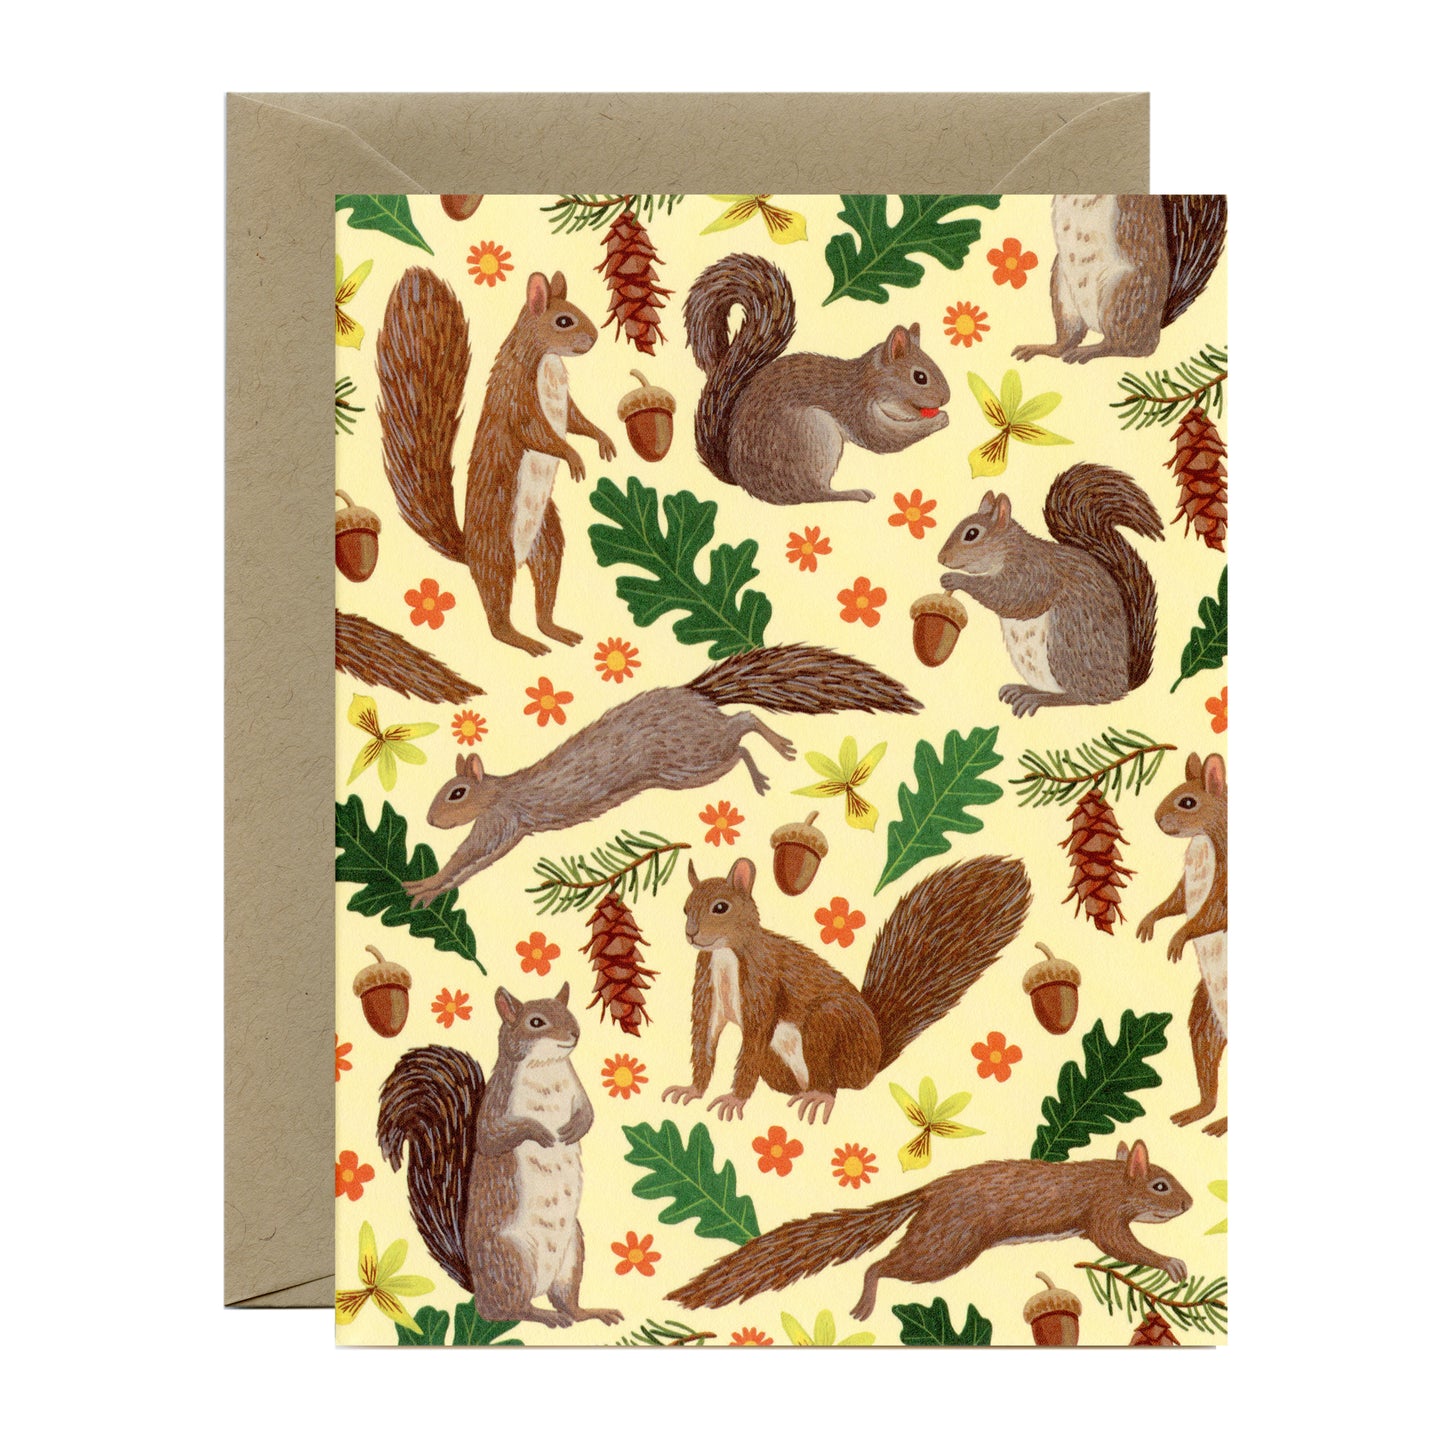 FOREST ANIMALS - BLANK GREETING CARDS, VARIETY BOXED SET OF 8